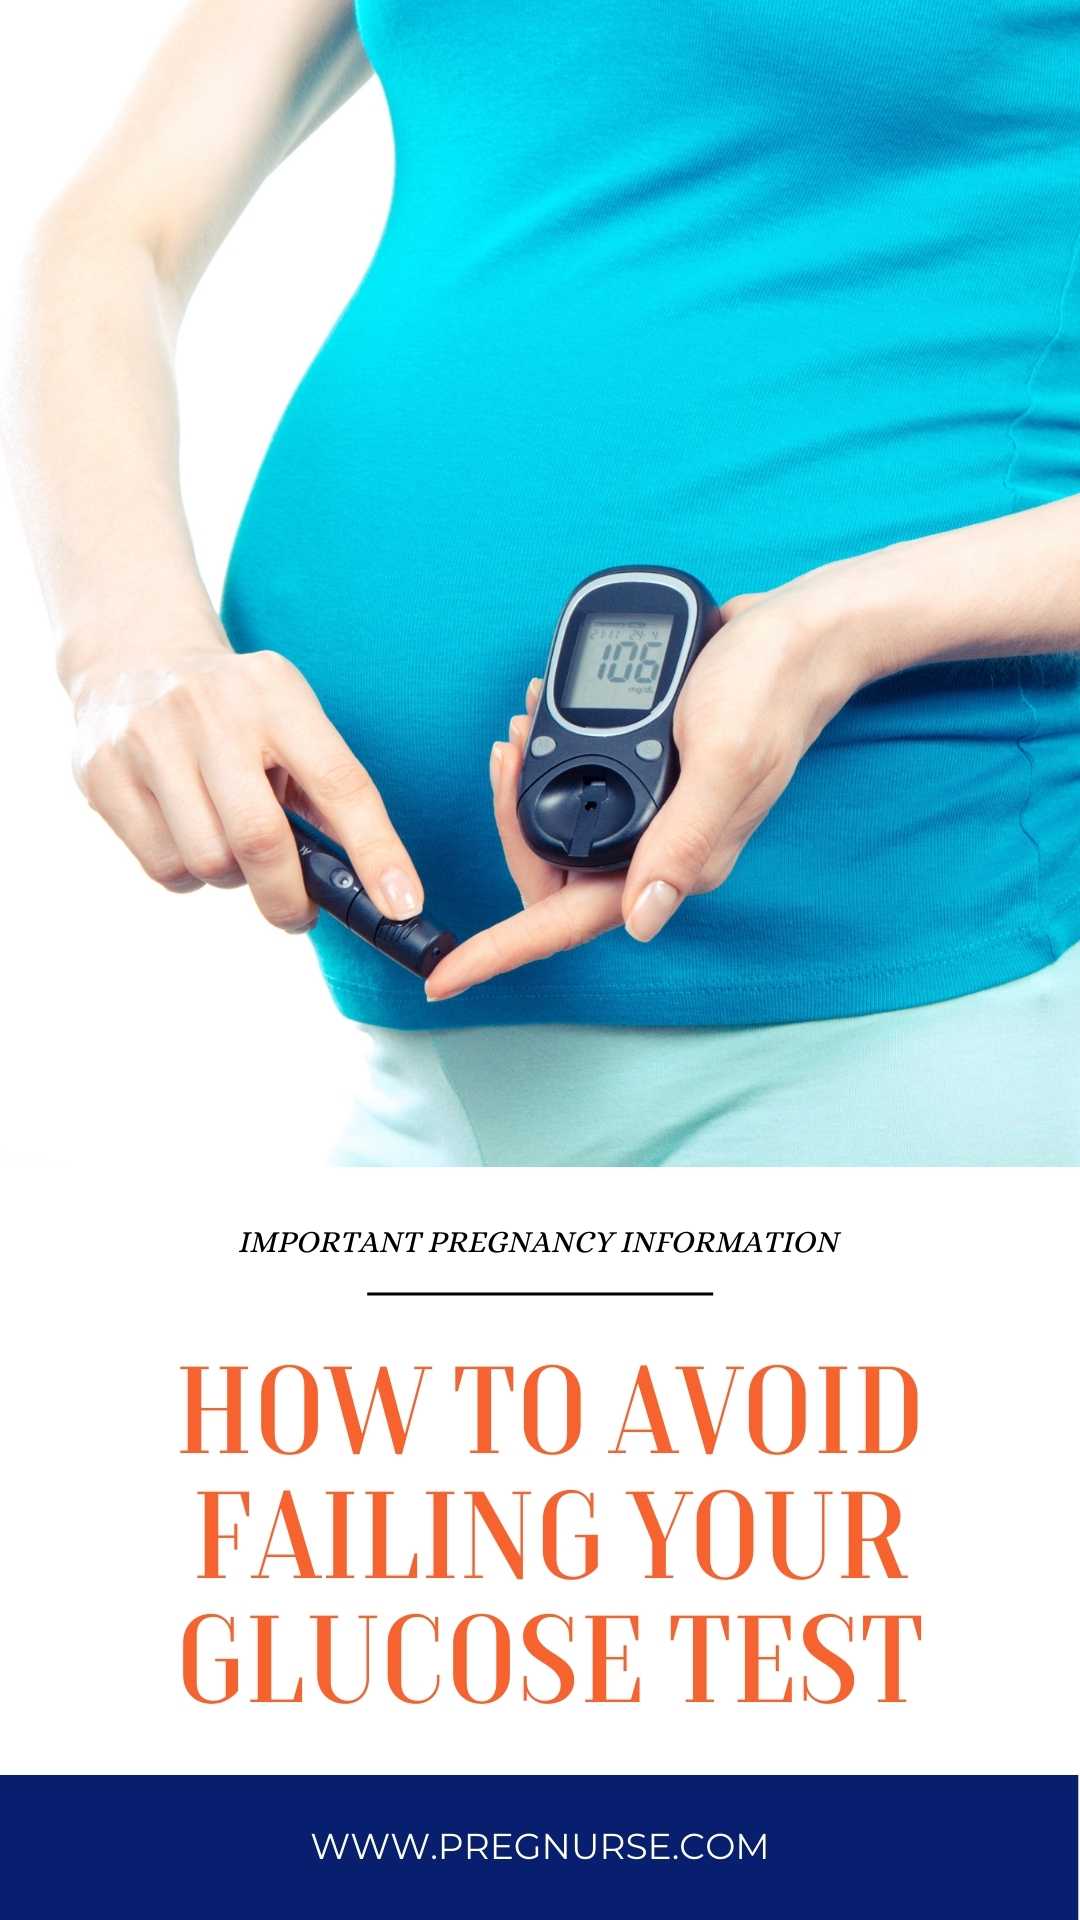 It is important to test for gestational diabetes during pregnancy. In order to do that they have a glucose tolerance screening test to diagnose gestational diabetes.